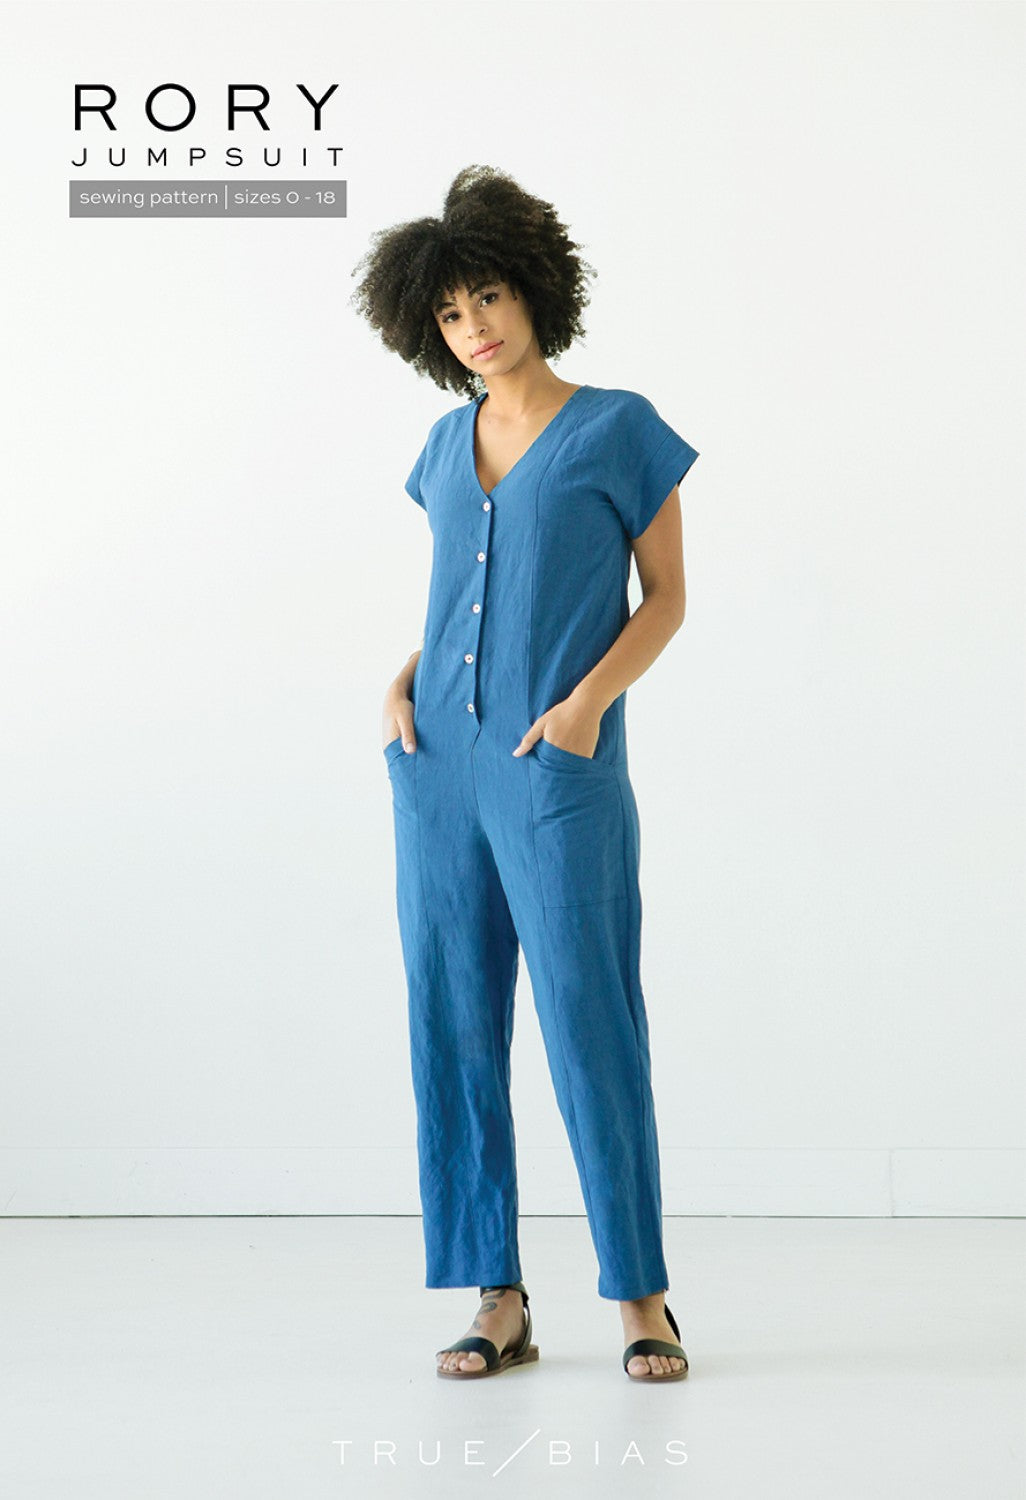 Rory Jumpsuit - By True Bias Patterns